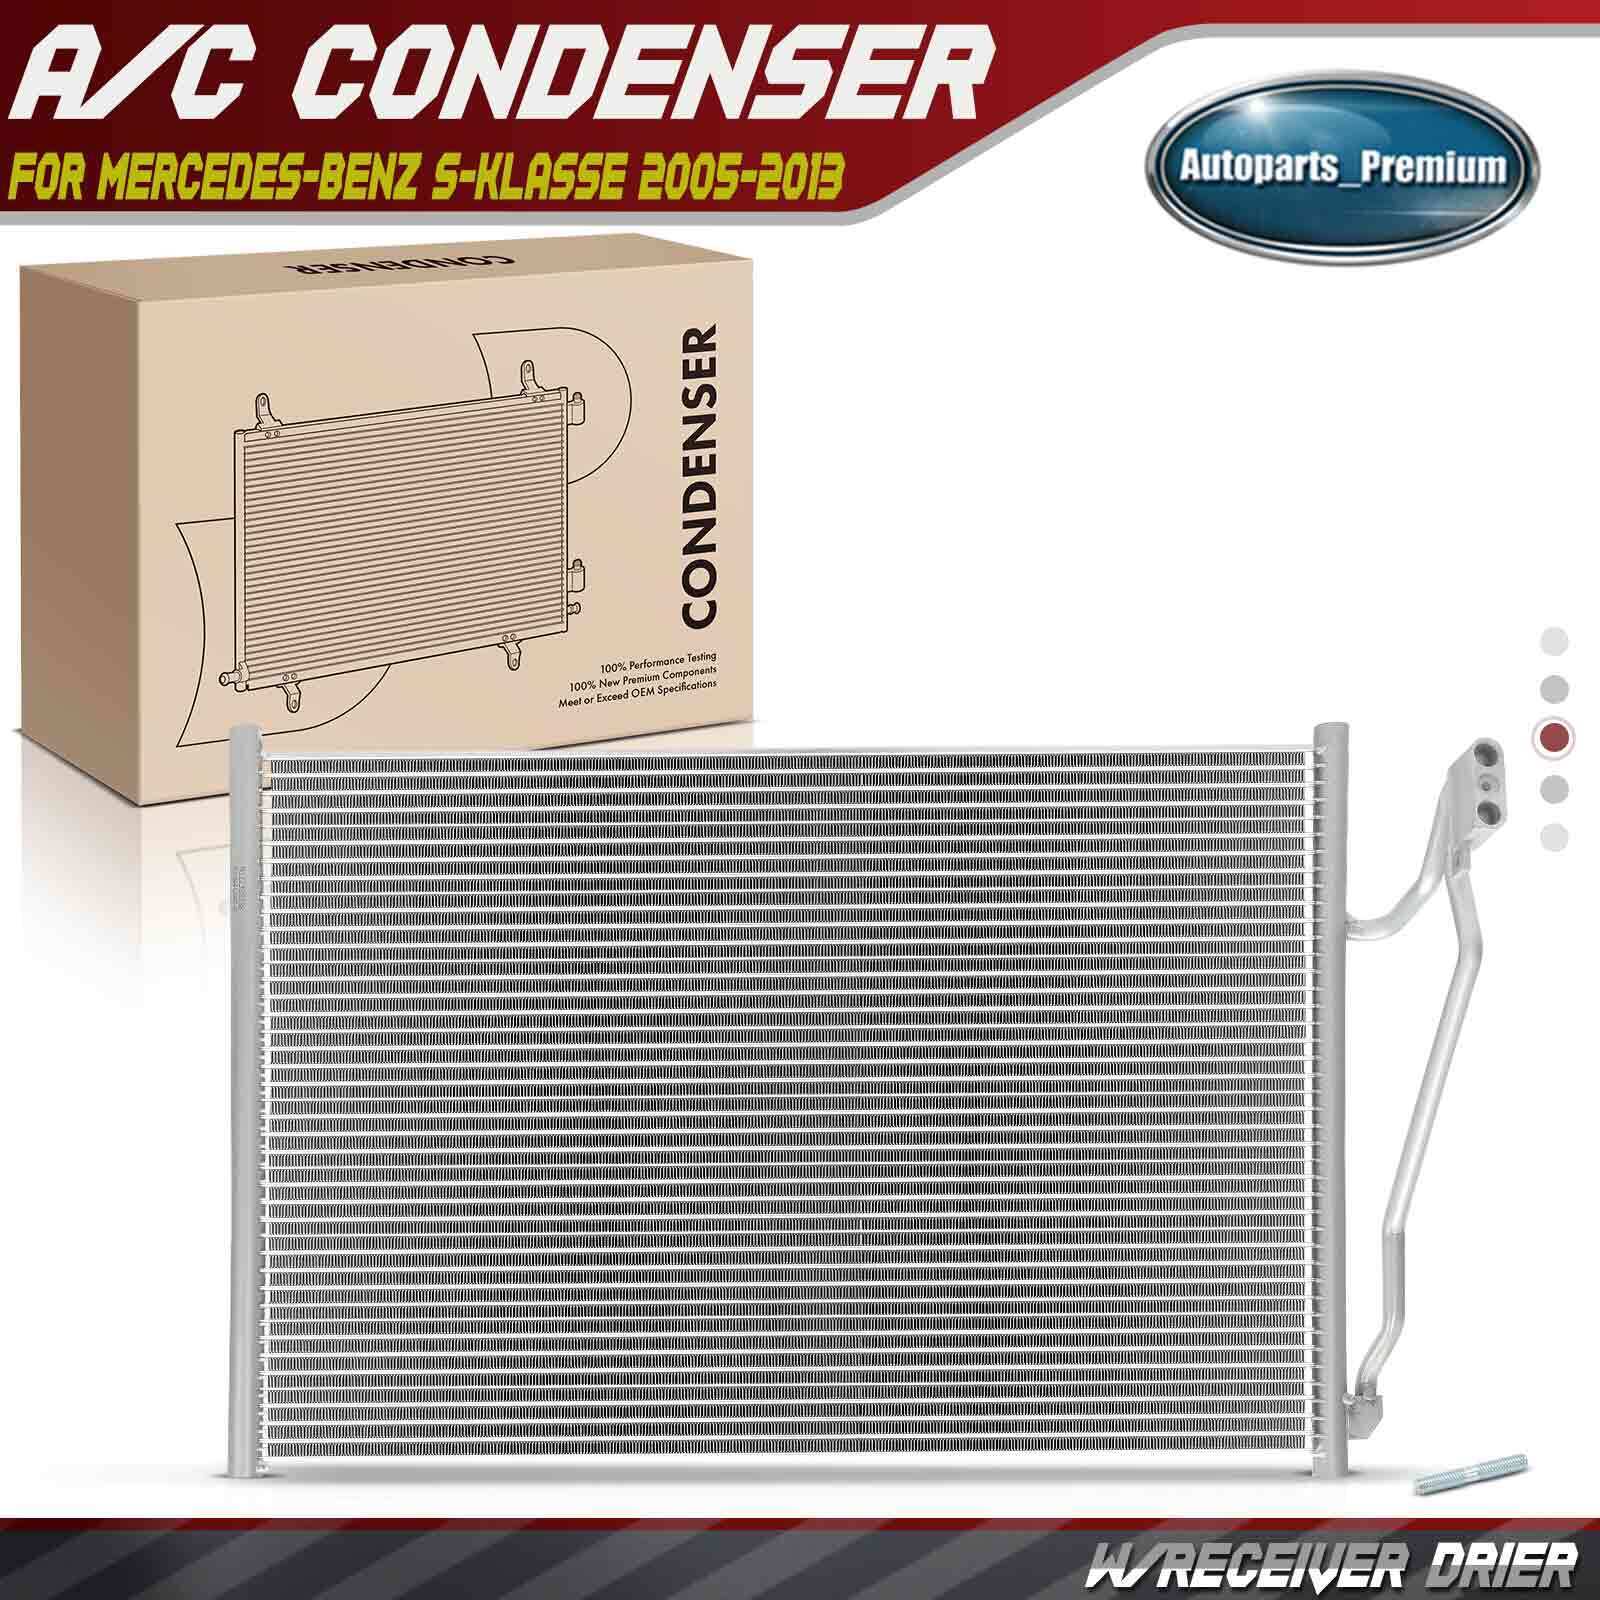 New AC A/C Condenser for Mercedes-Benz CL550 CL600 CL63 AMG S550 S600 S63 AMG